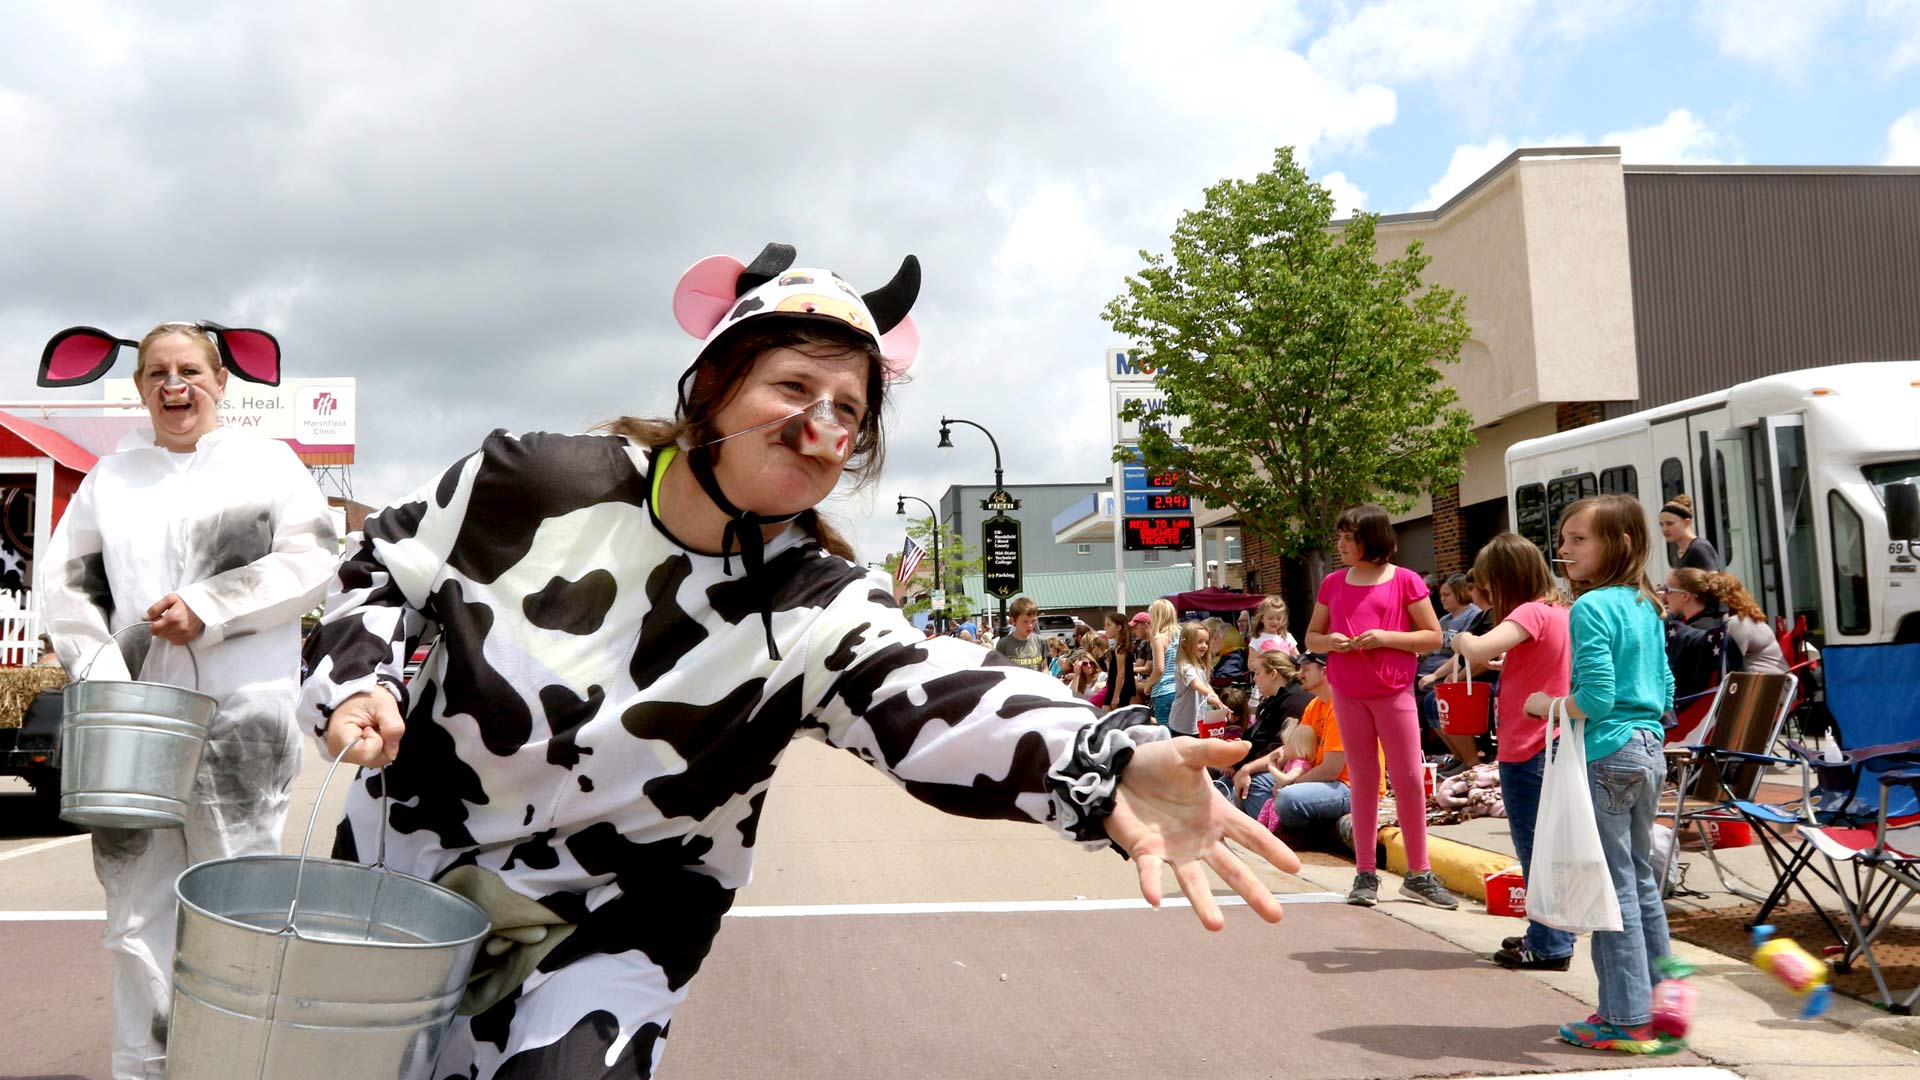 Person dressed as cow throwing candy to kids during a parade